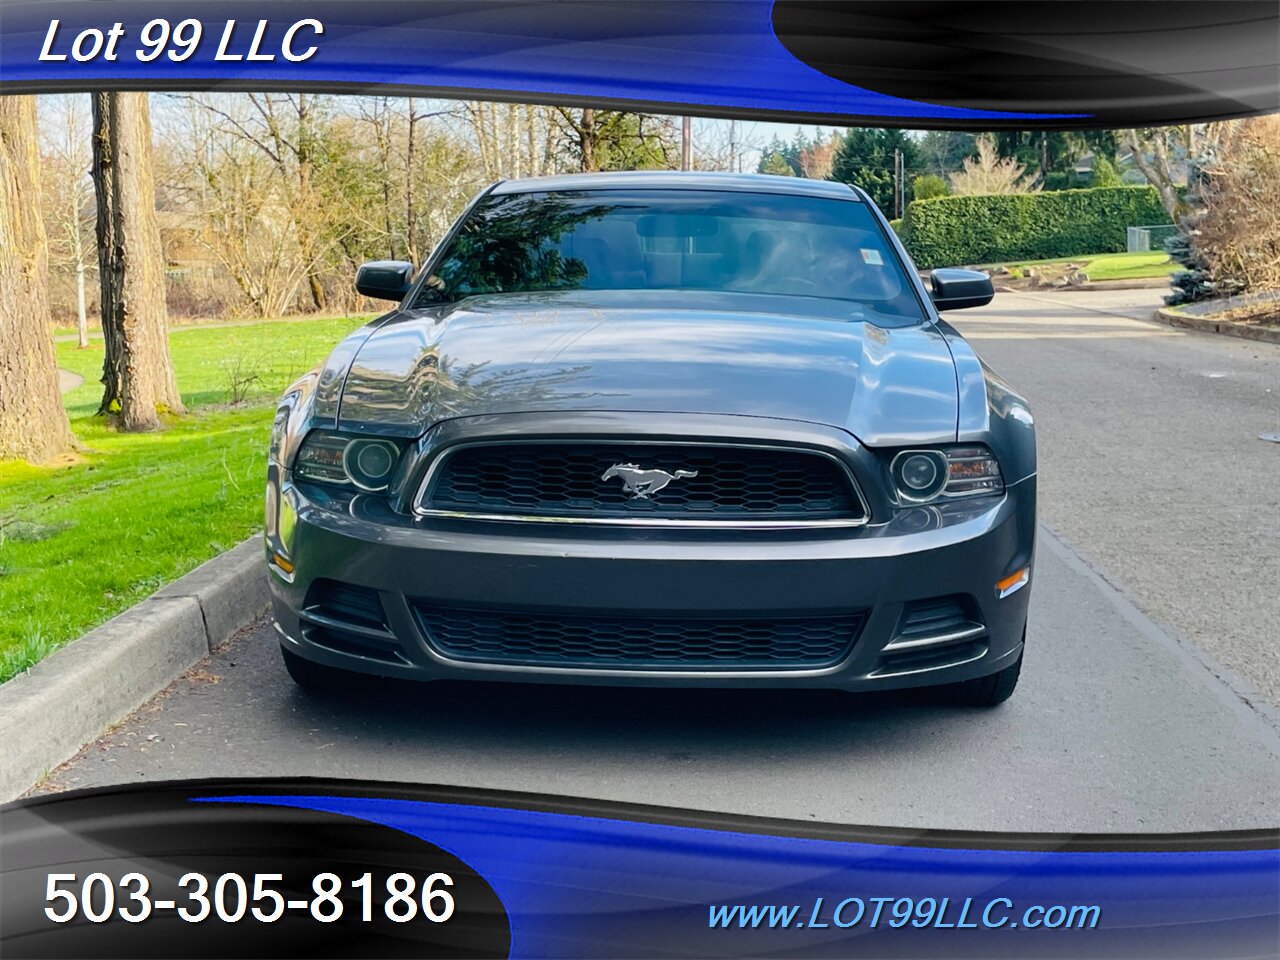 2014 Ford Mustang V6  3.7L V6 305hp  145k Miles Auto, 6-Spd SelectSh   - Photo 3 - Milwaukie, OR 97267